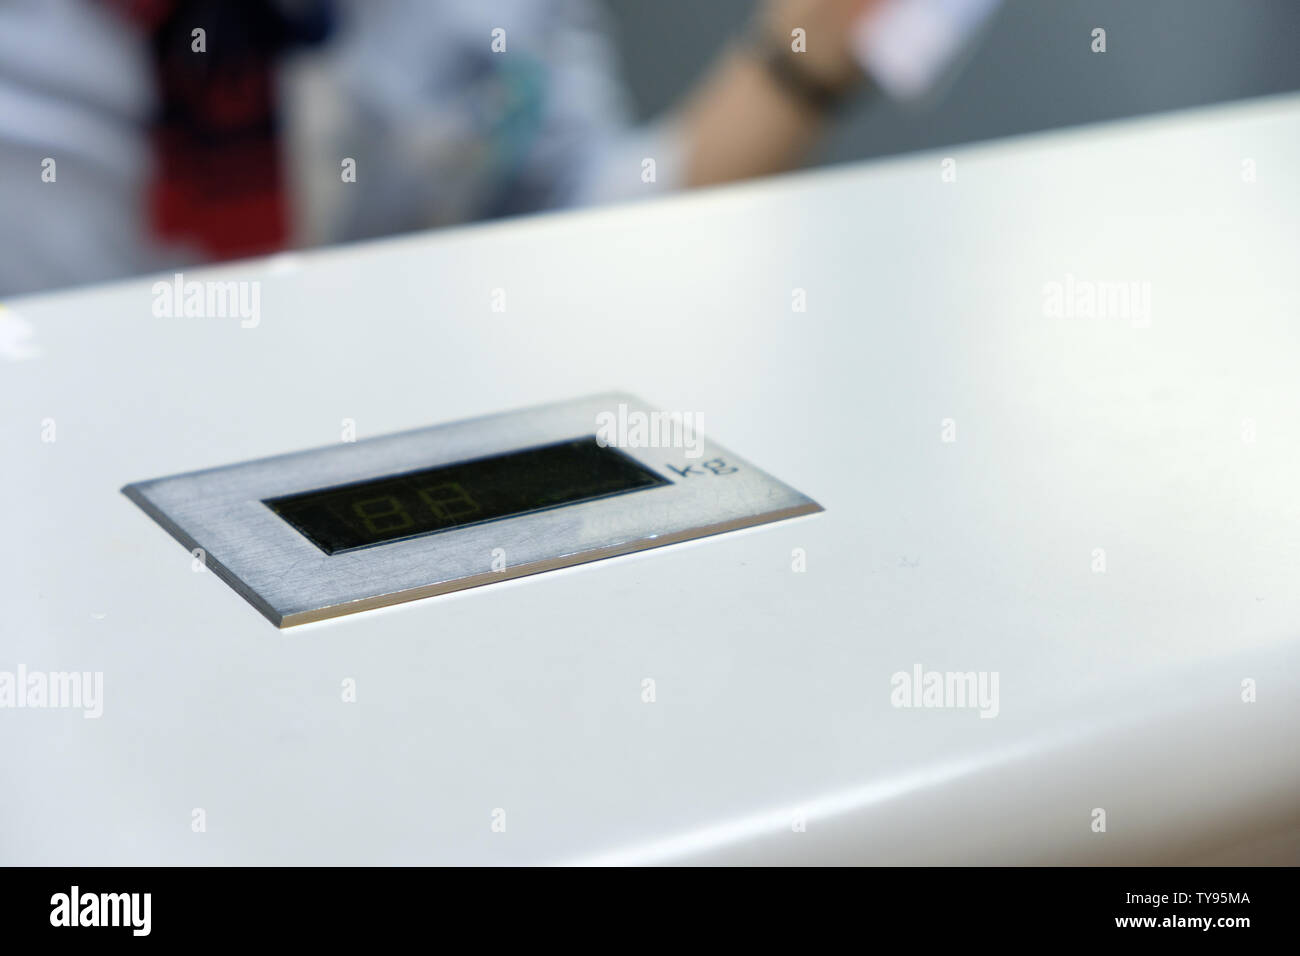 Digital bar weight scale on counter bar in check-in airport Stock Photo